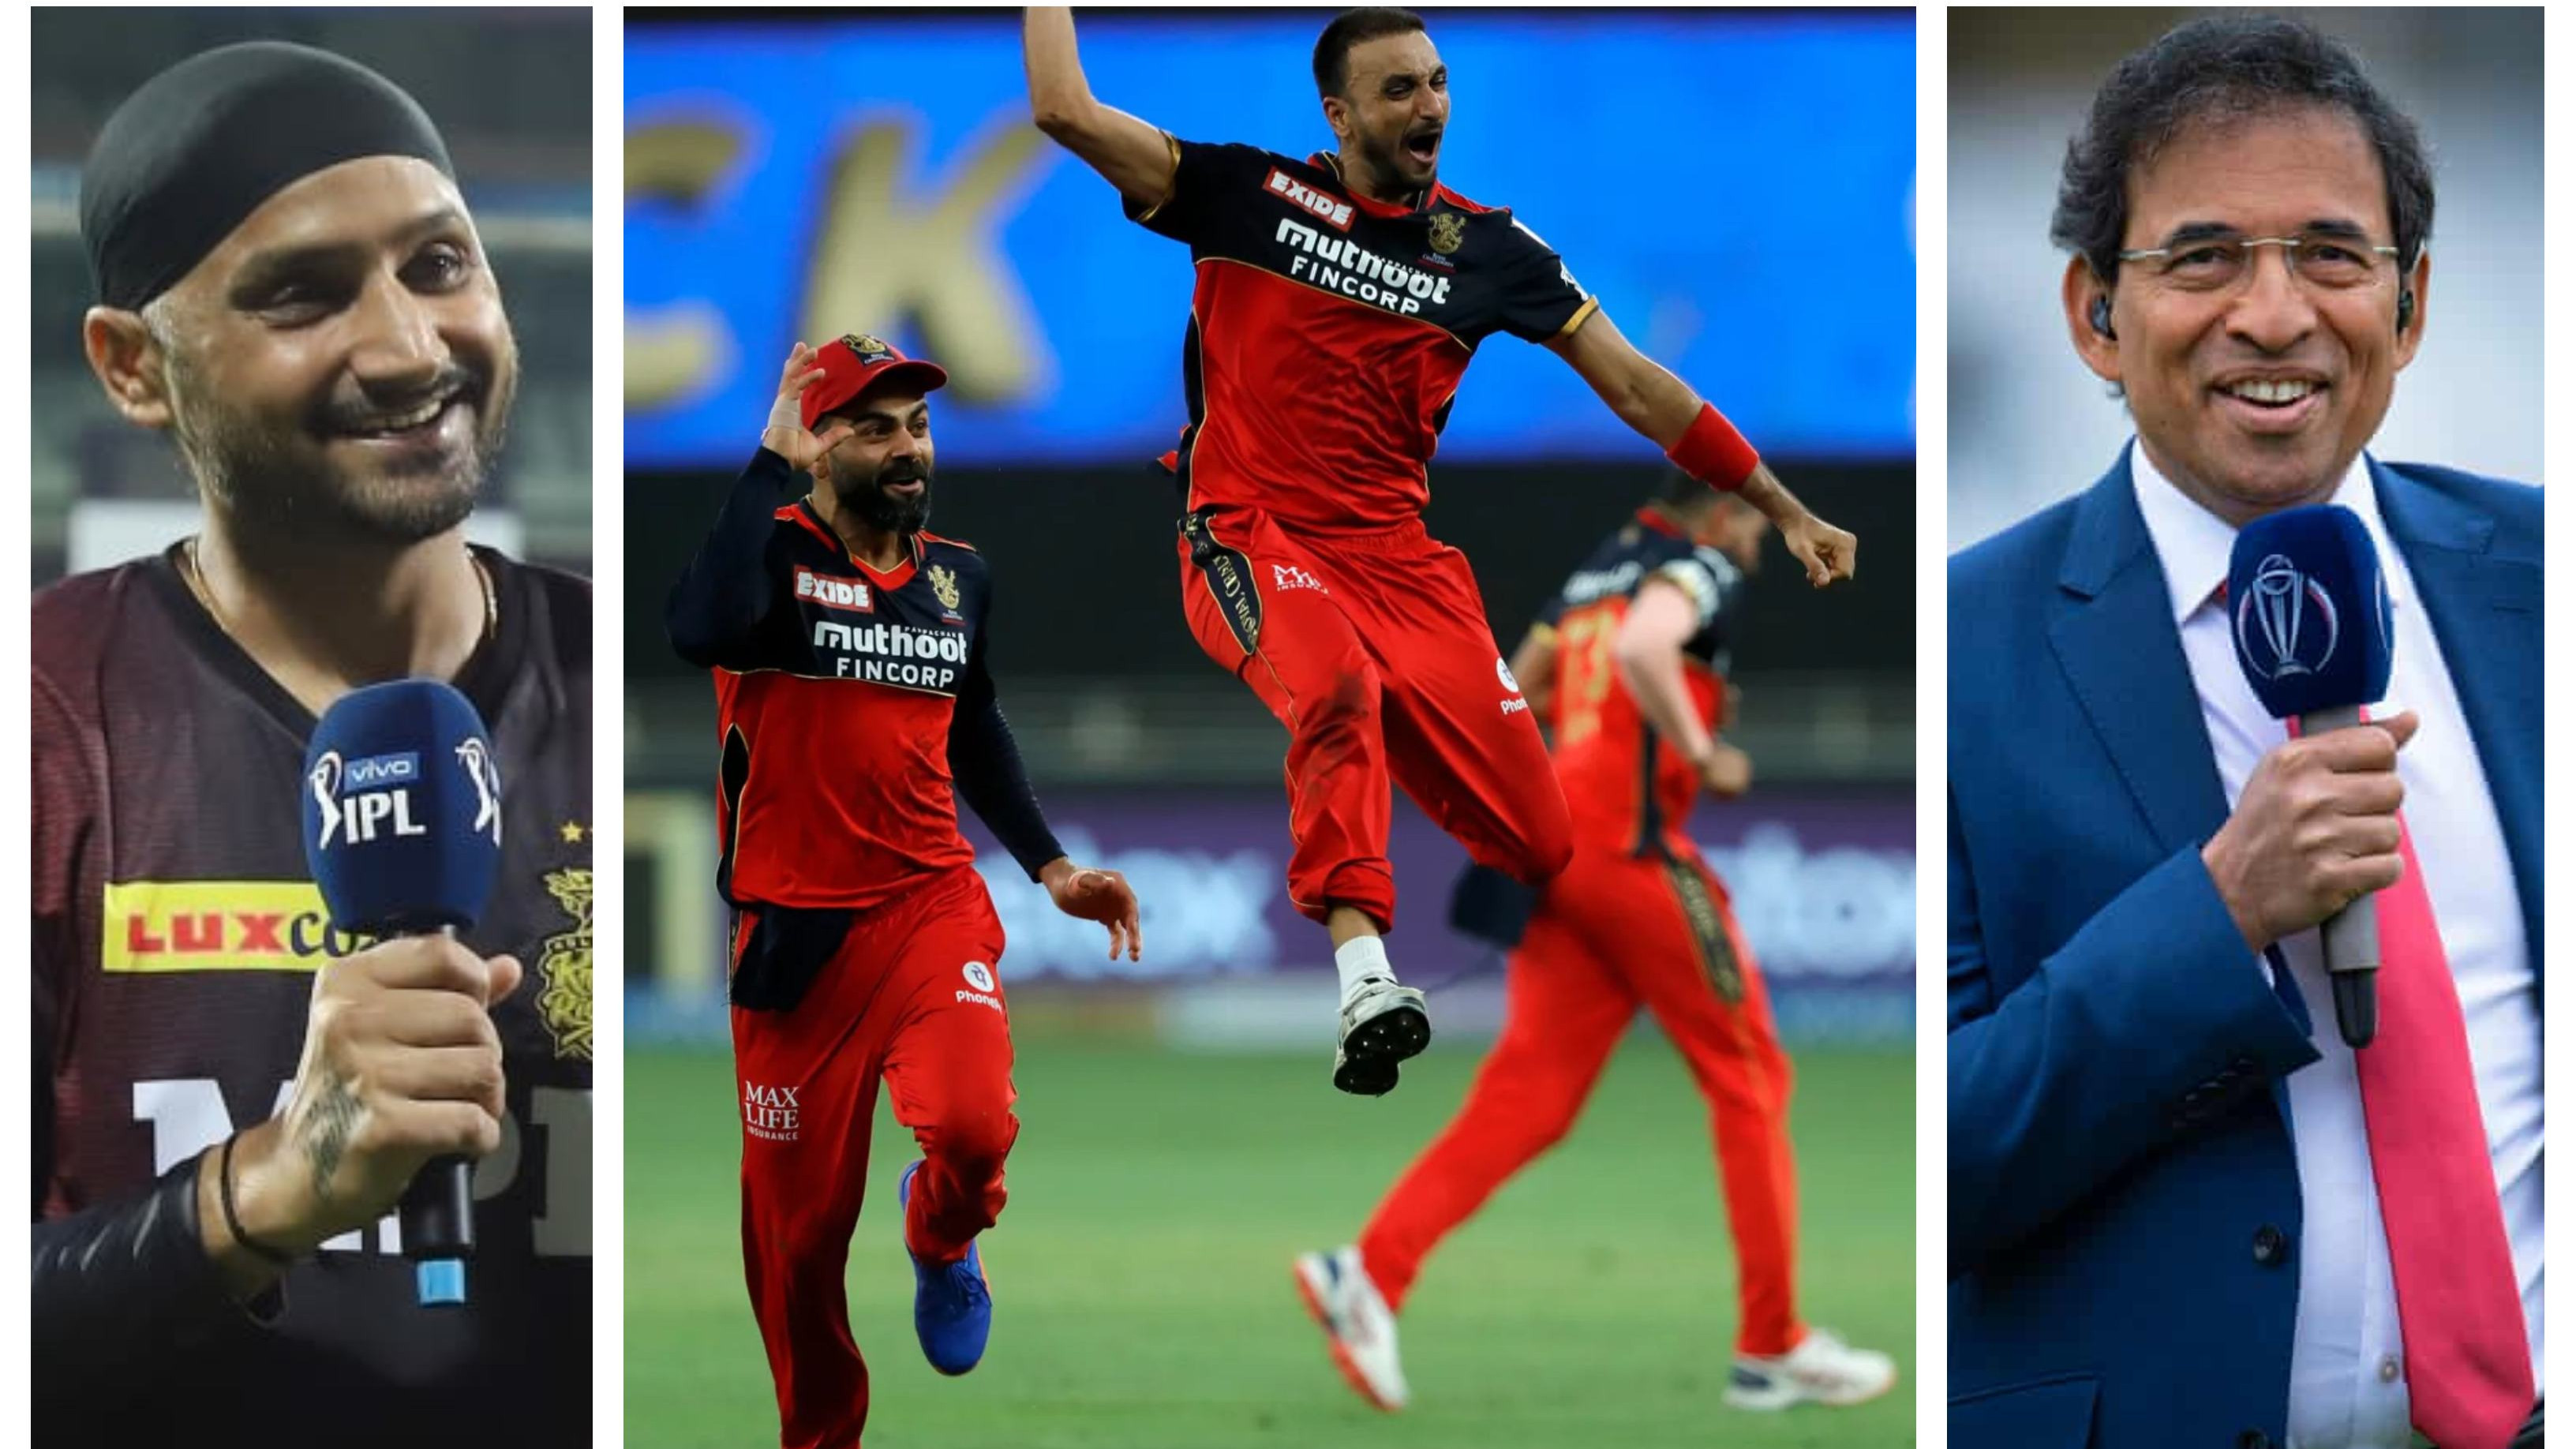 IPL 2021: Cricket fraternity reacts as Harshal Patel’s hat-trick gives RCB their first win in UAE-leg